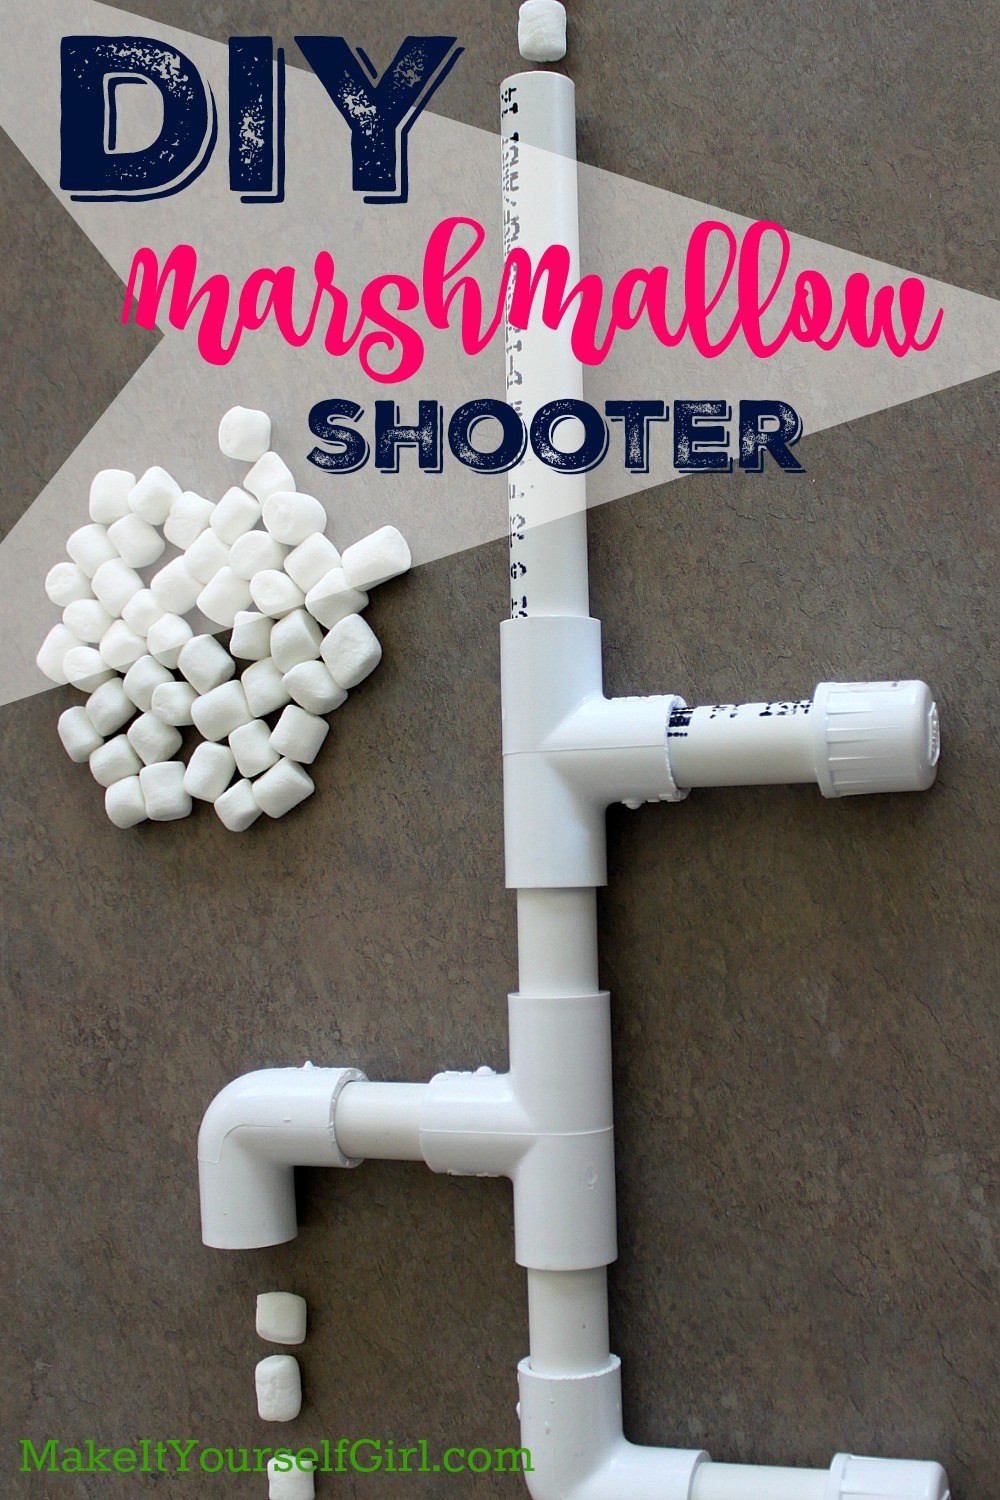 Best ideas about Marshmallow Shooter DIY
. Save or Pin Marshmallow Shooter Make It Yourself Girl Now.